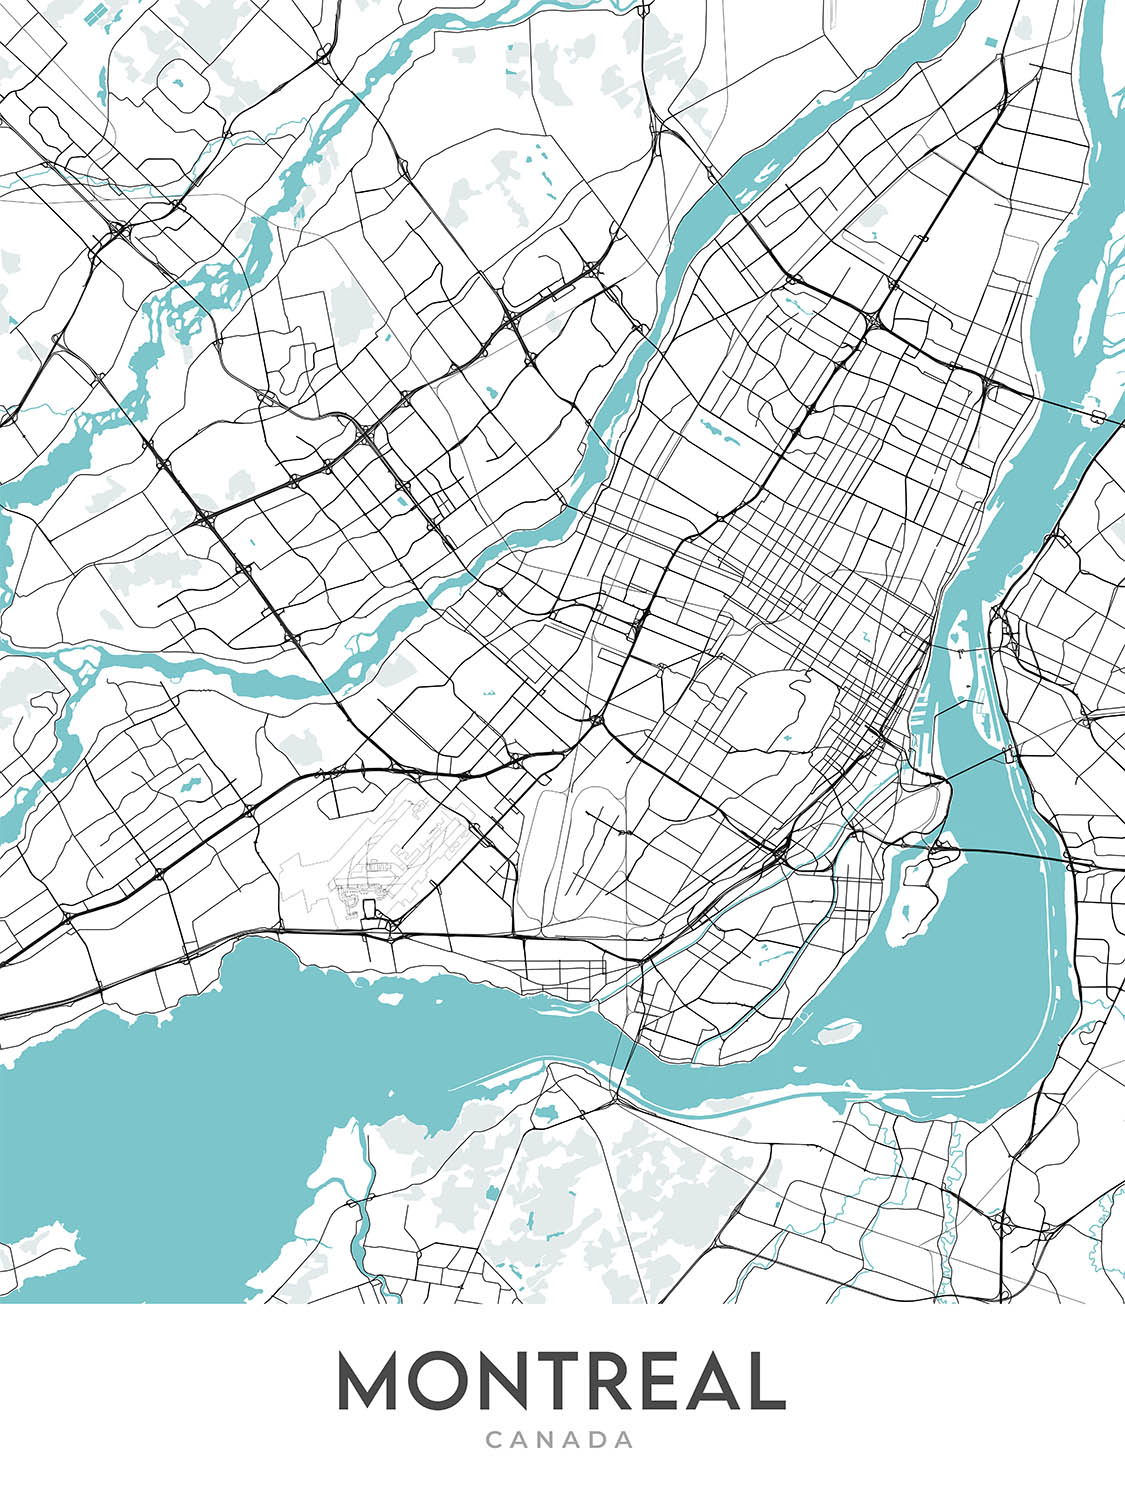 Modern City Map of Montreal, Canada: Mount Royal, McGill, Olympic Stadium